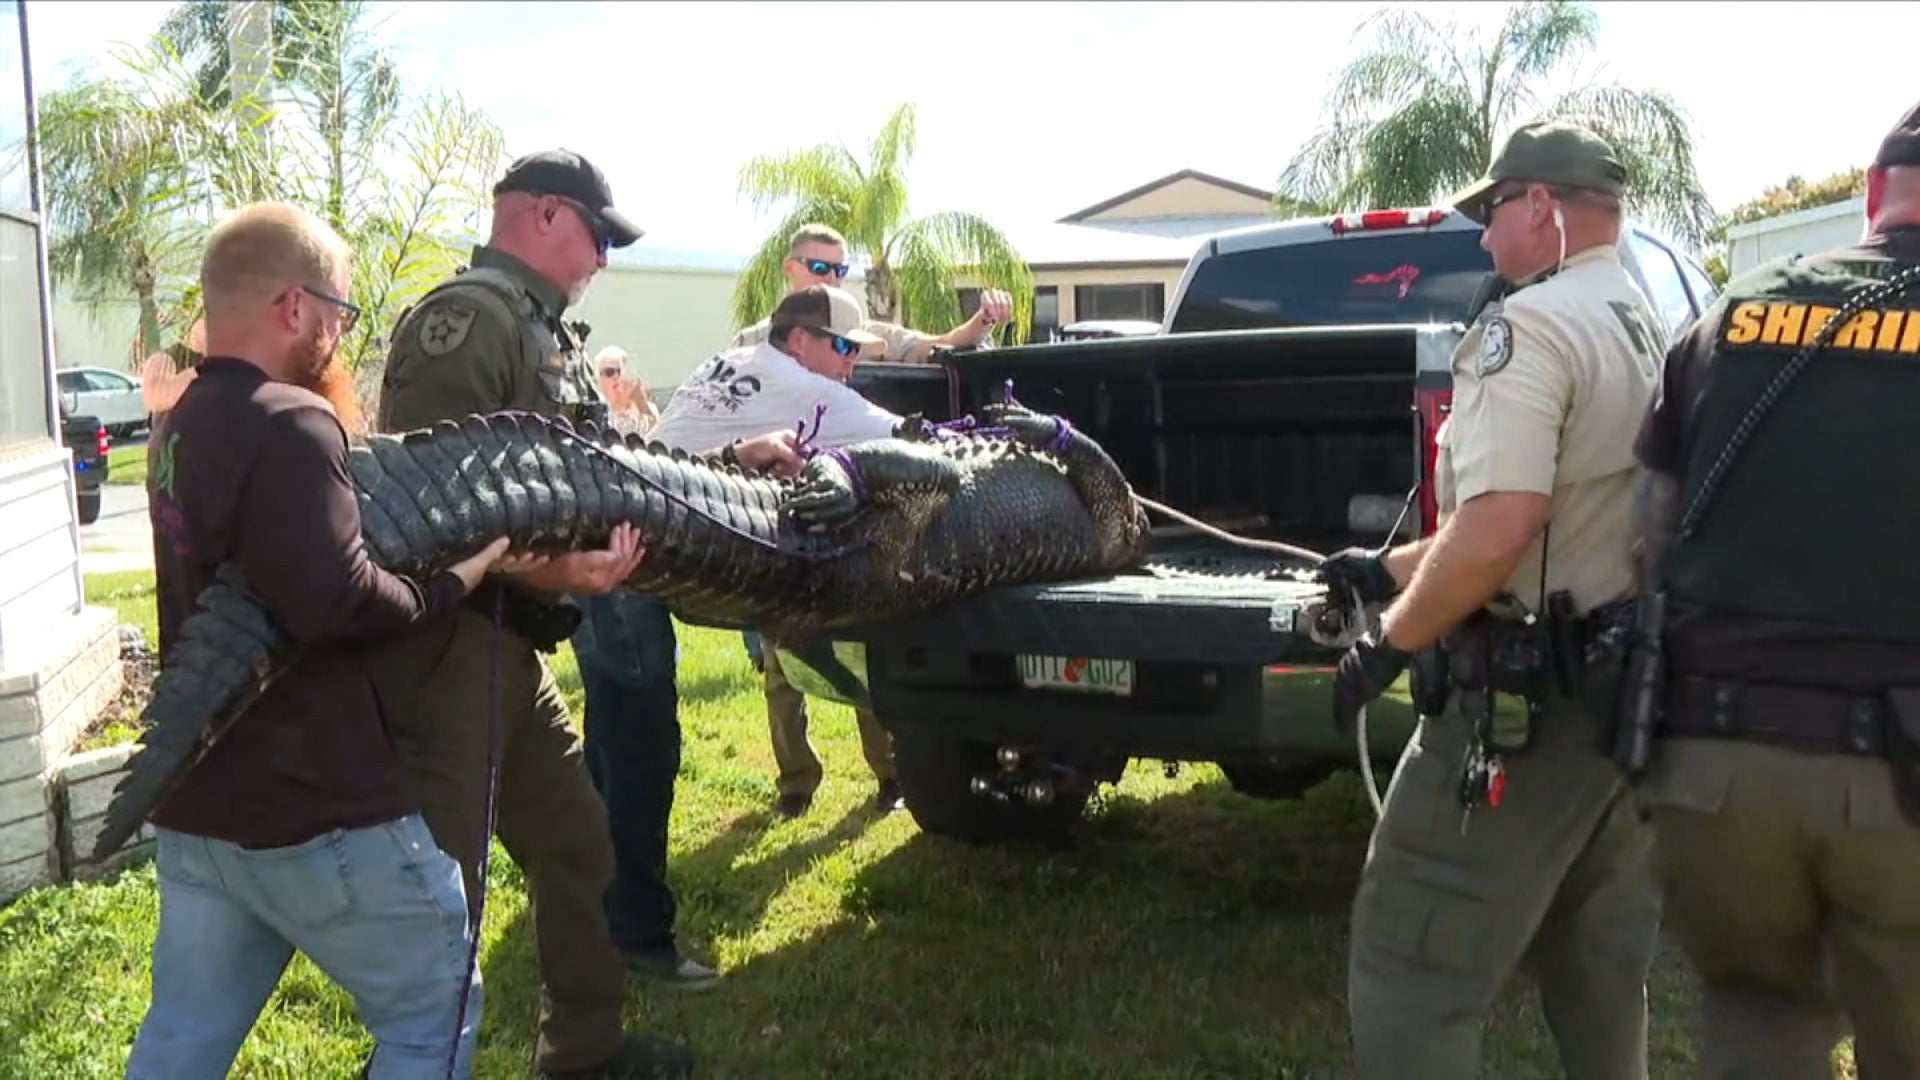 85-year-old woman killed by alligator in Florida - WISH-TV | Indianapolis News | Indiana Weather | Indiana Traffic